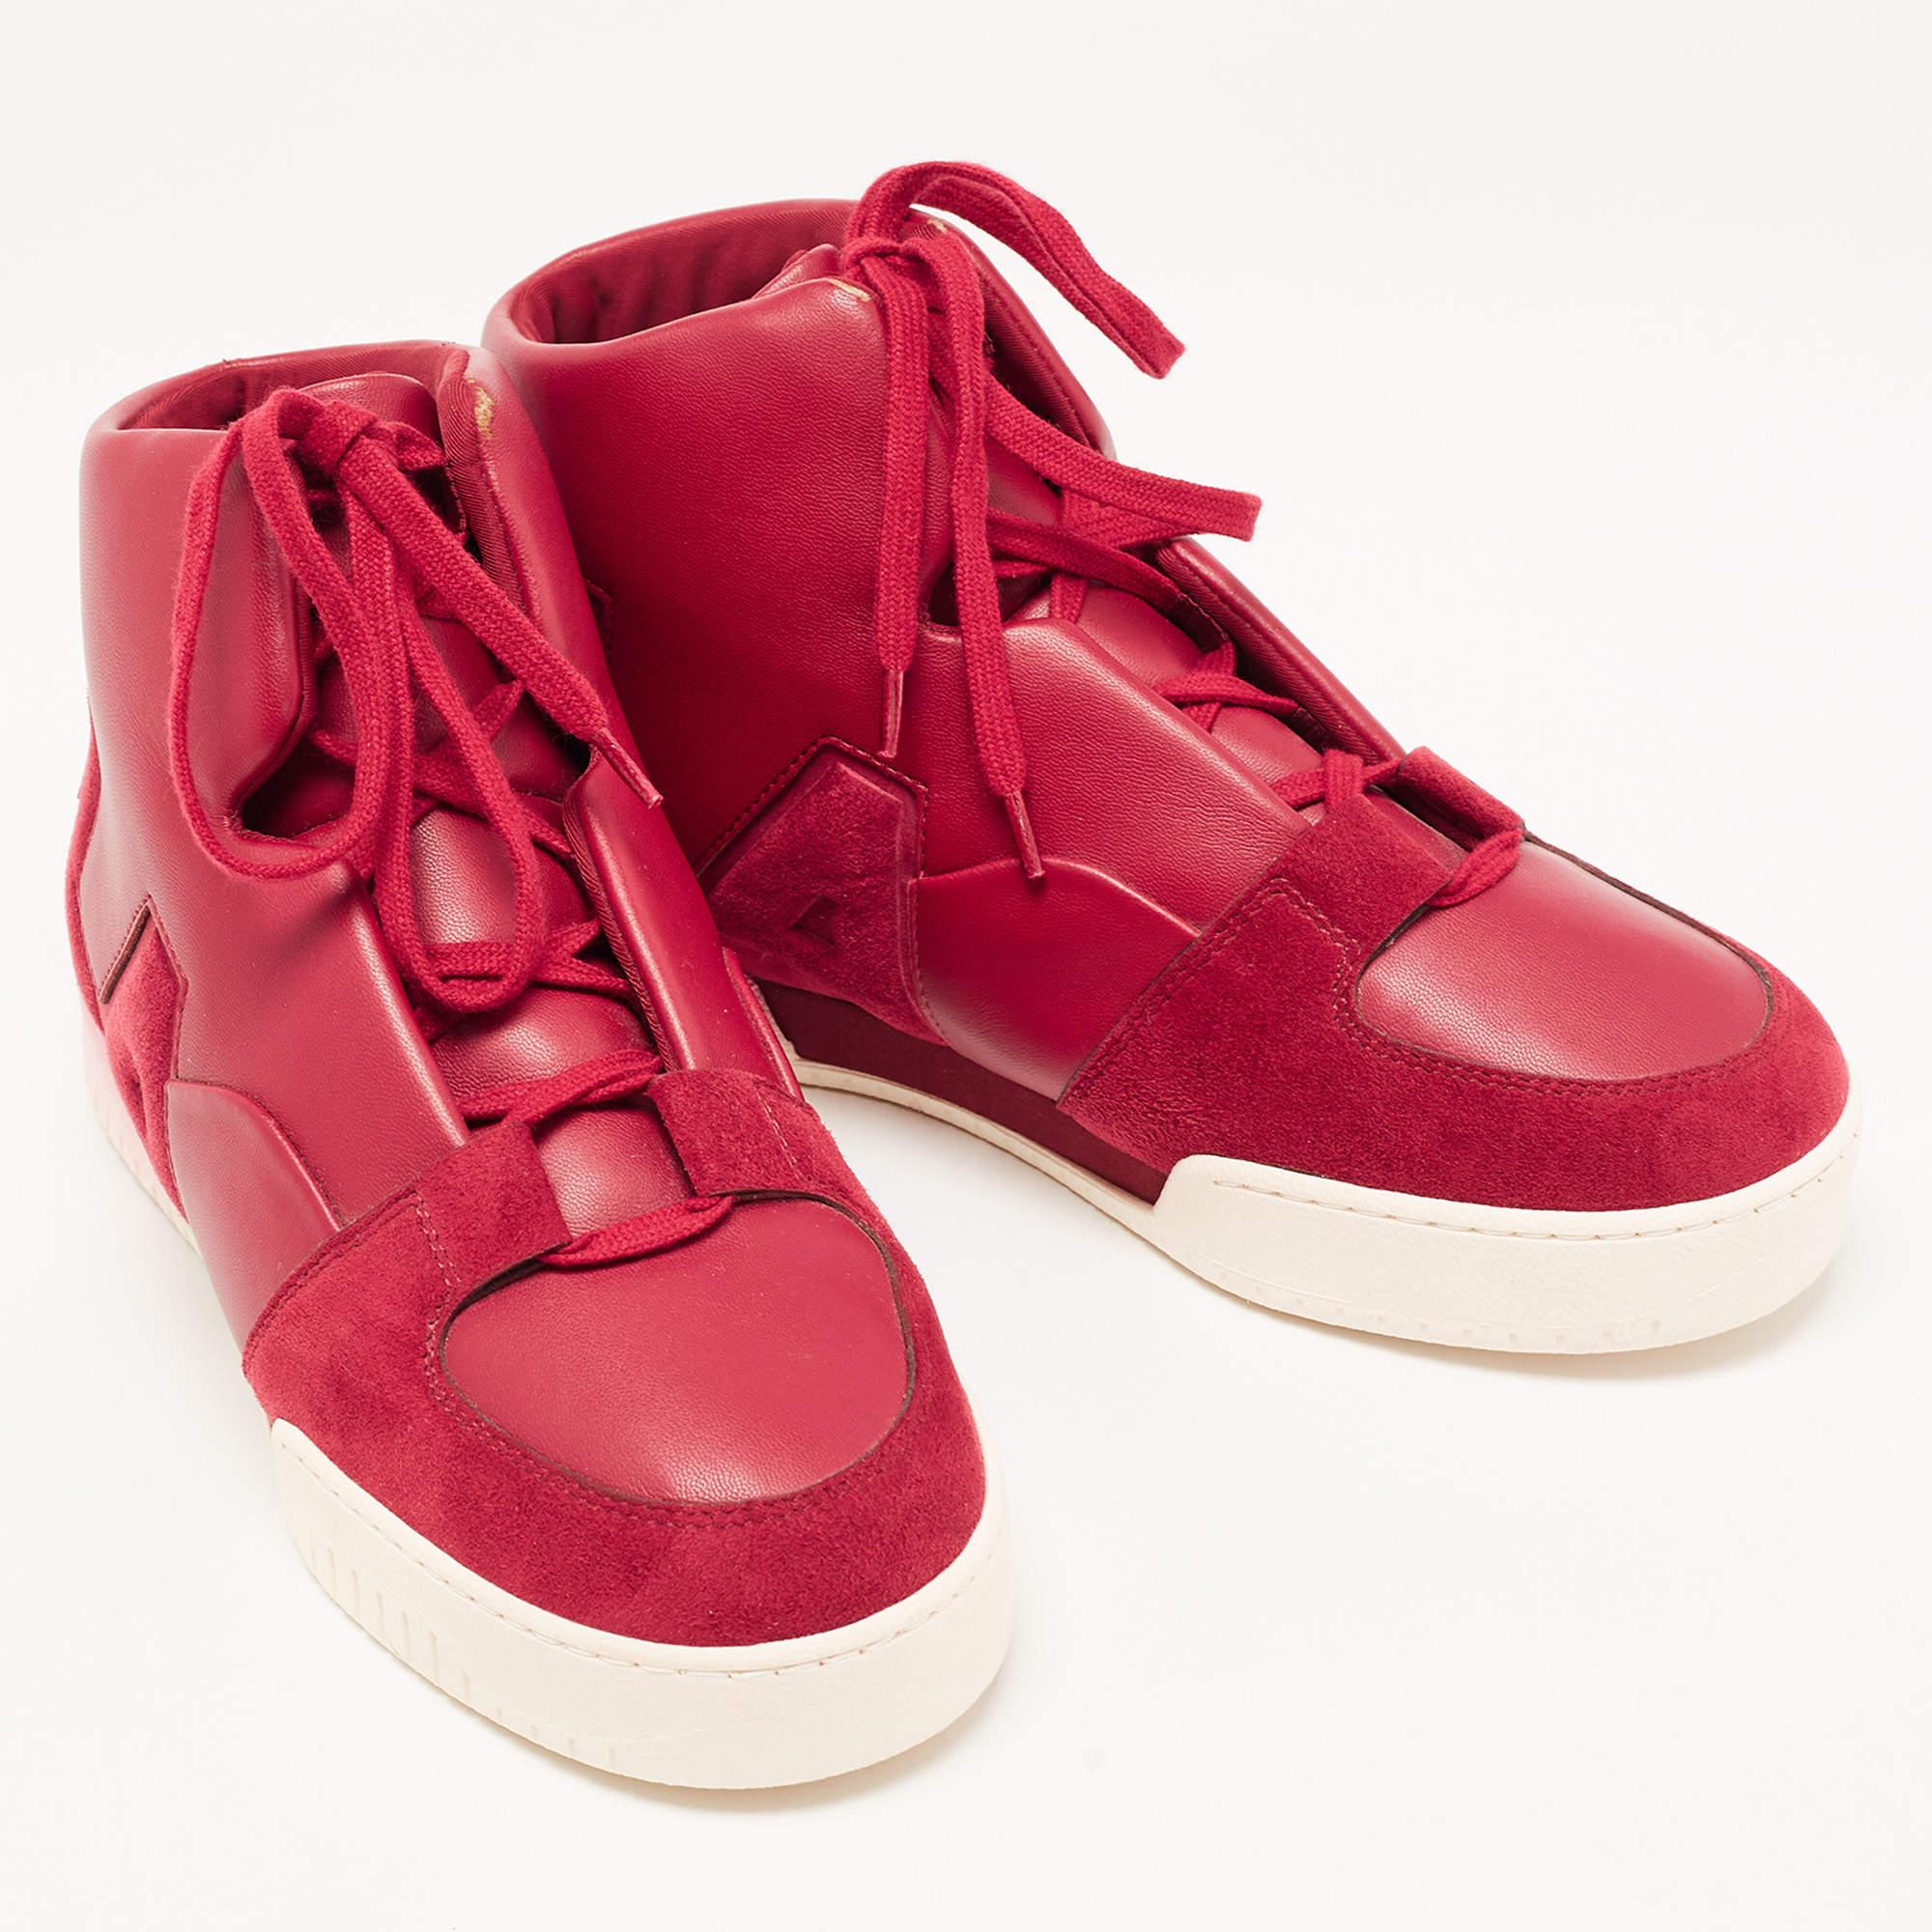 Stella McCartney Red Faux Leather and Faux Suede High Top Sneakers Size 37 1